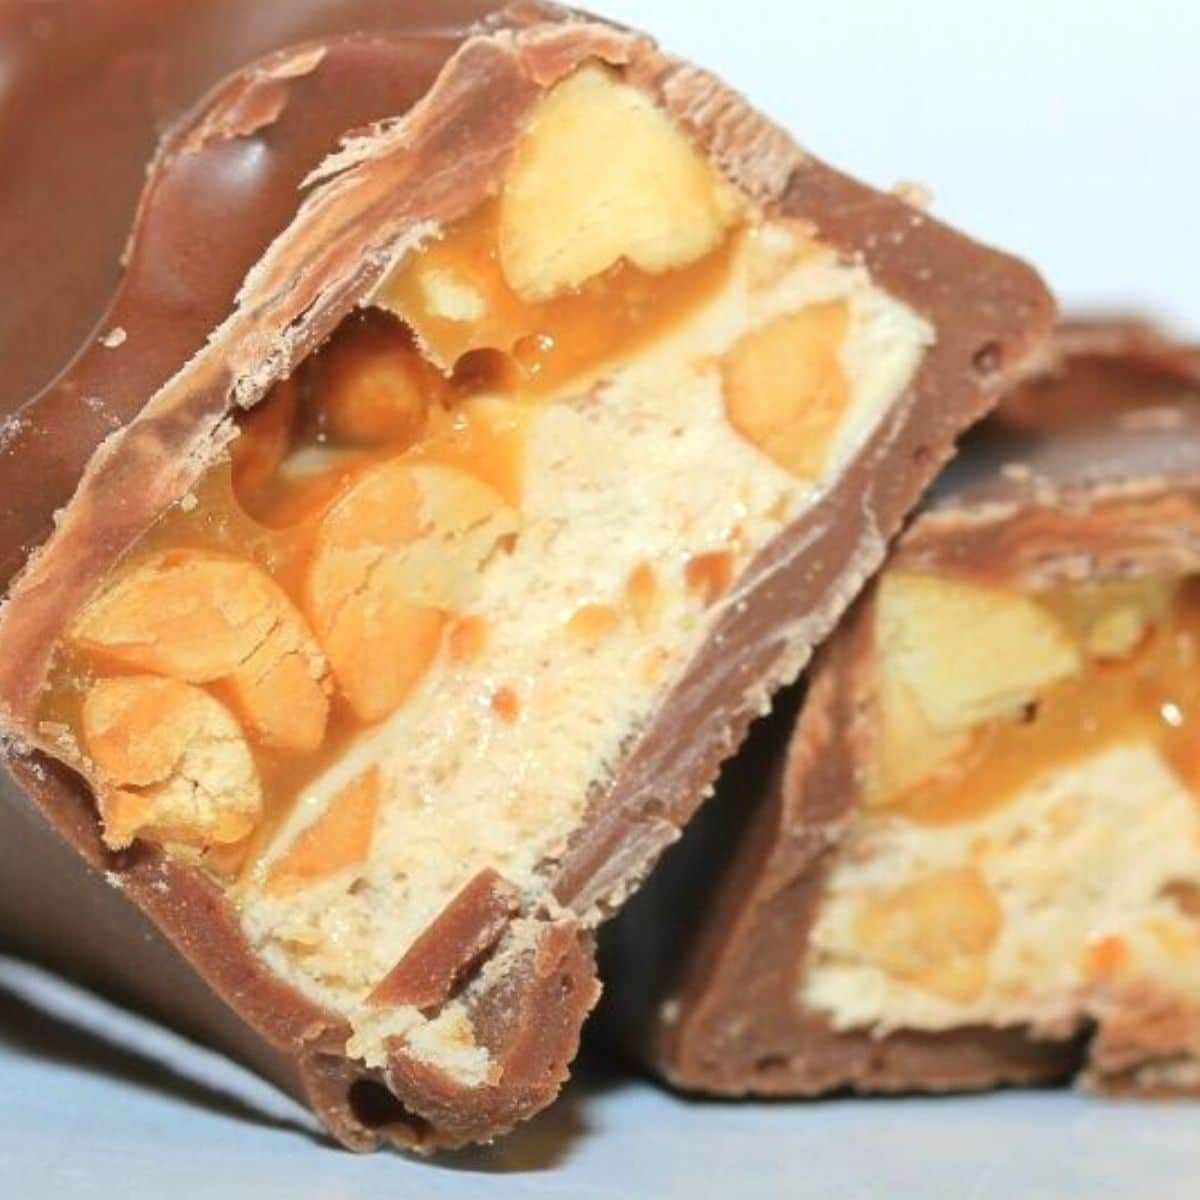 The inside of a snickers bar.